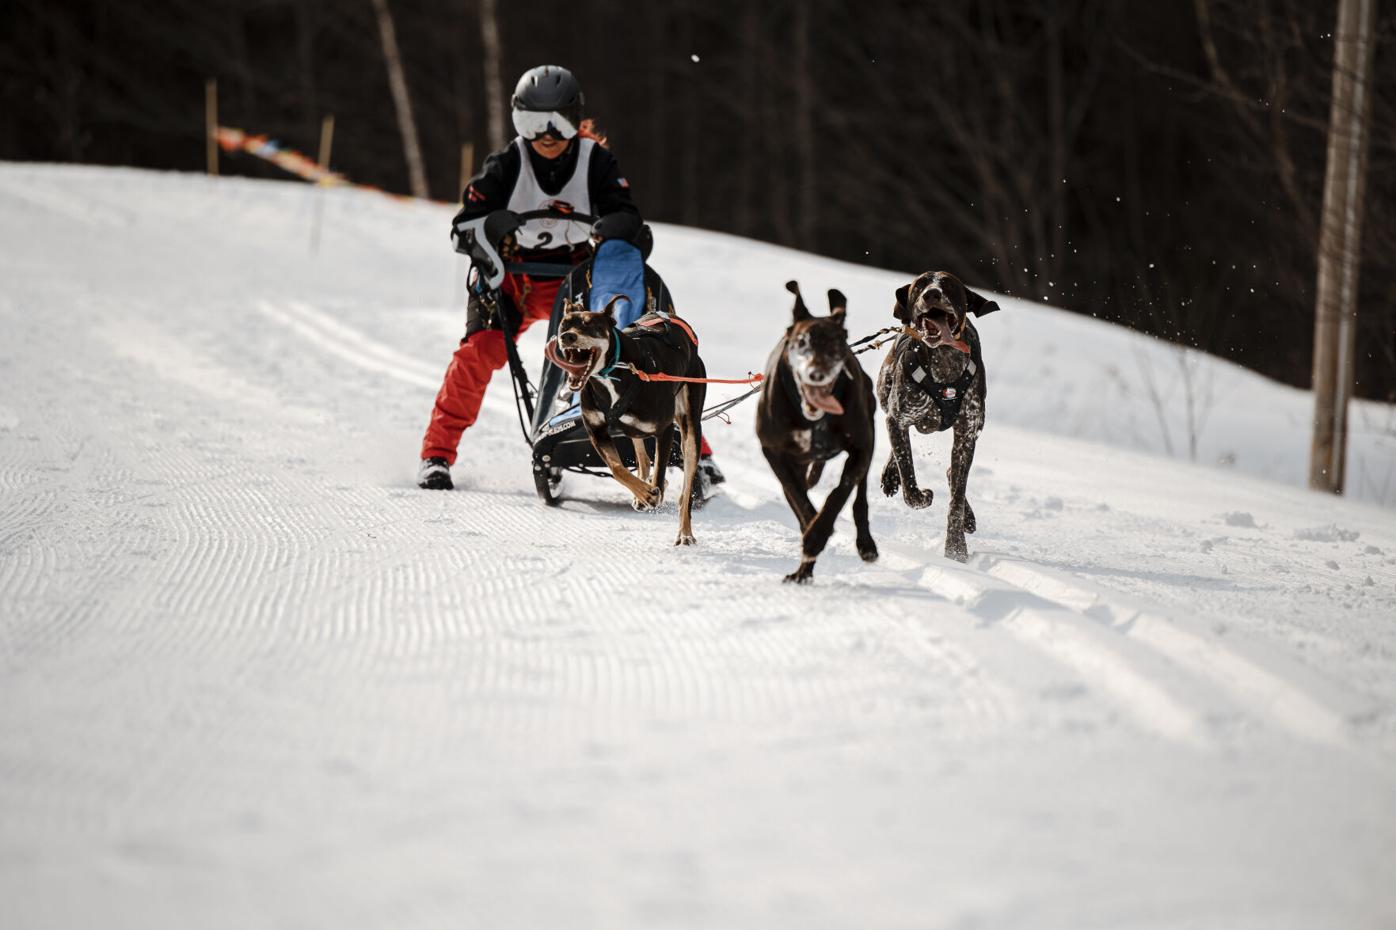 With warming winters, mushers in N.H. face changes to their sport